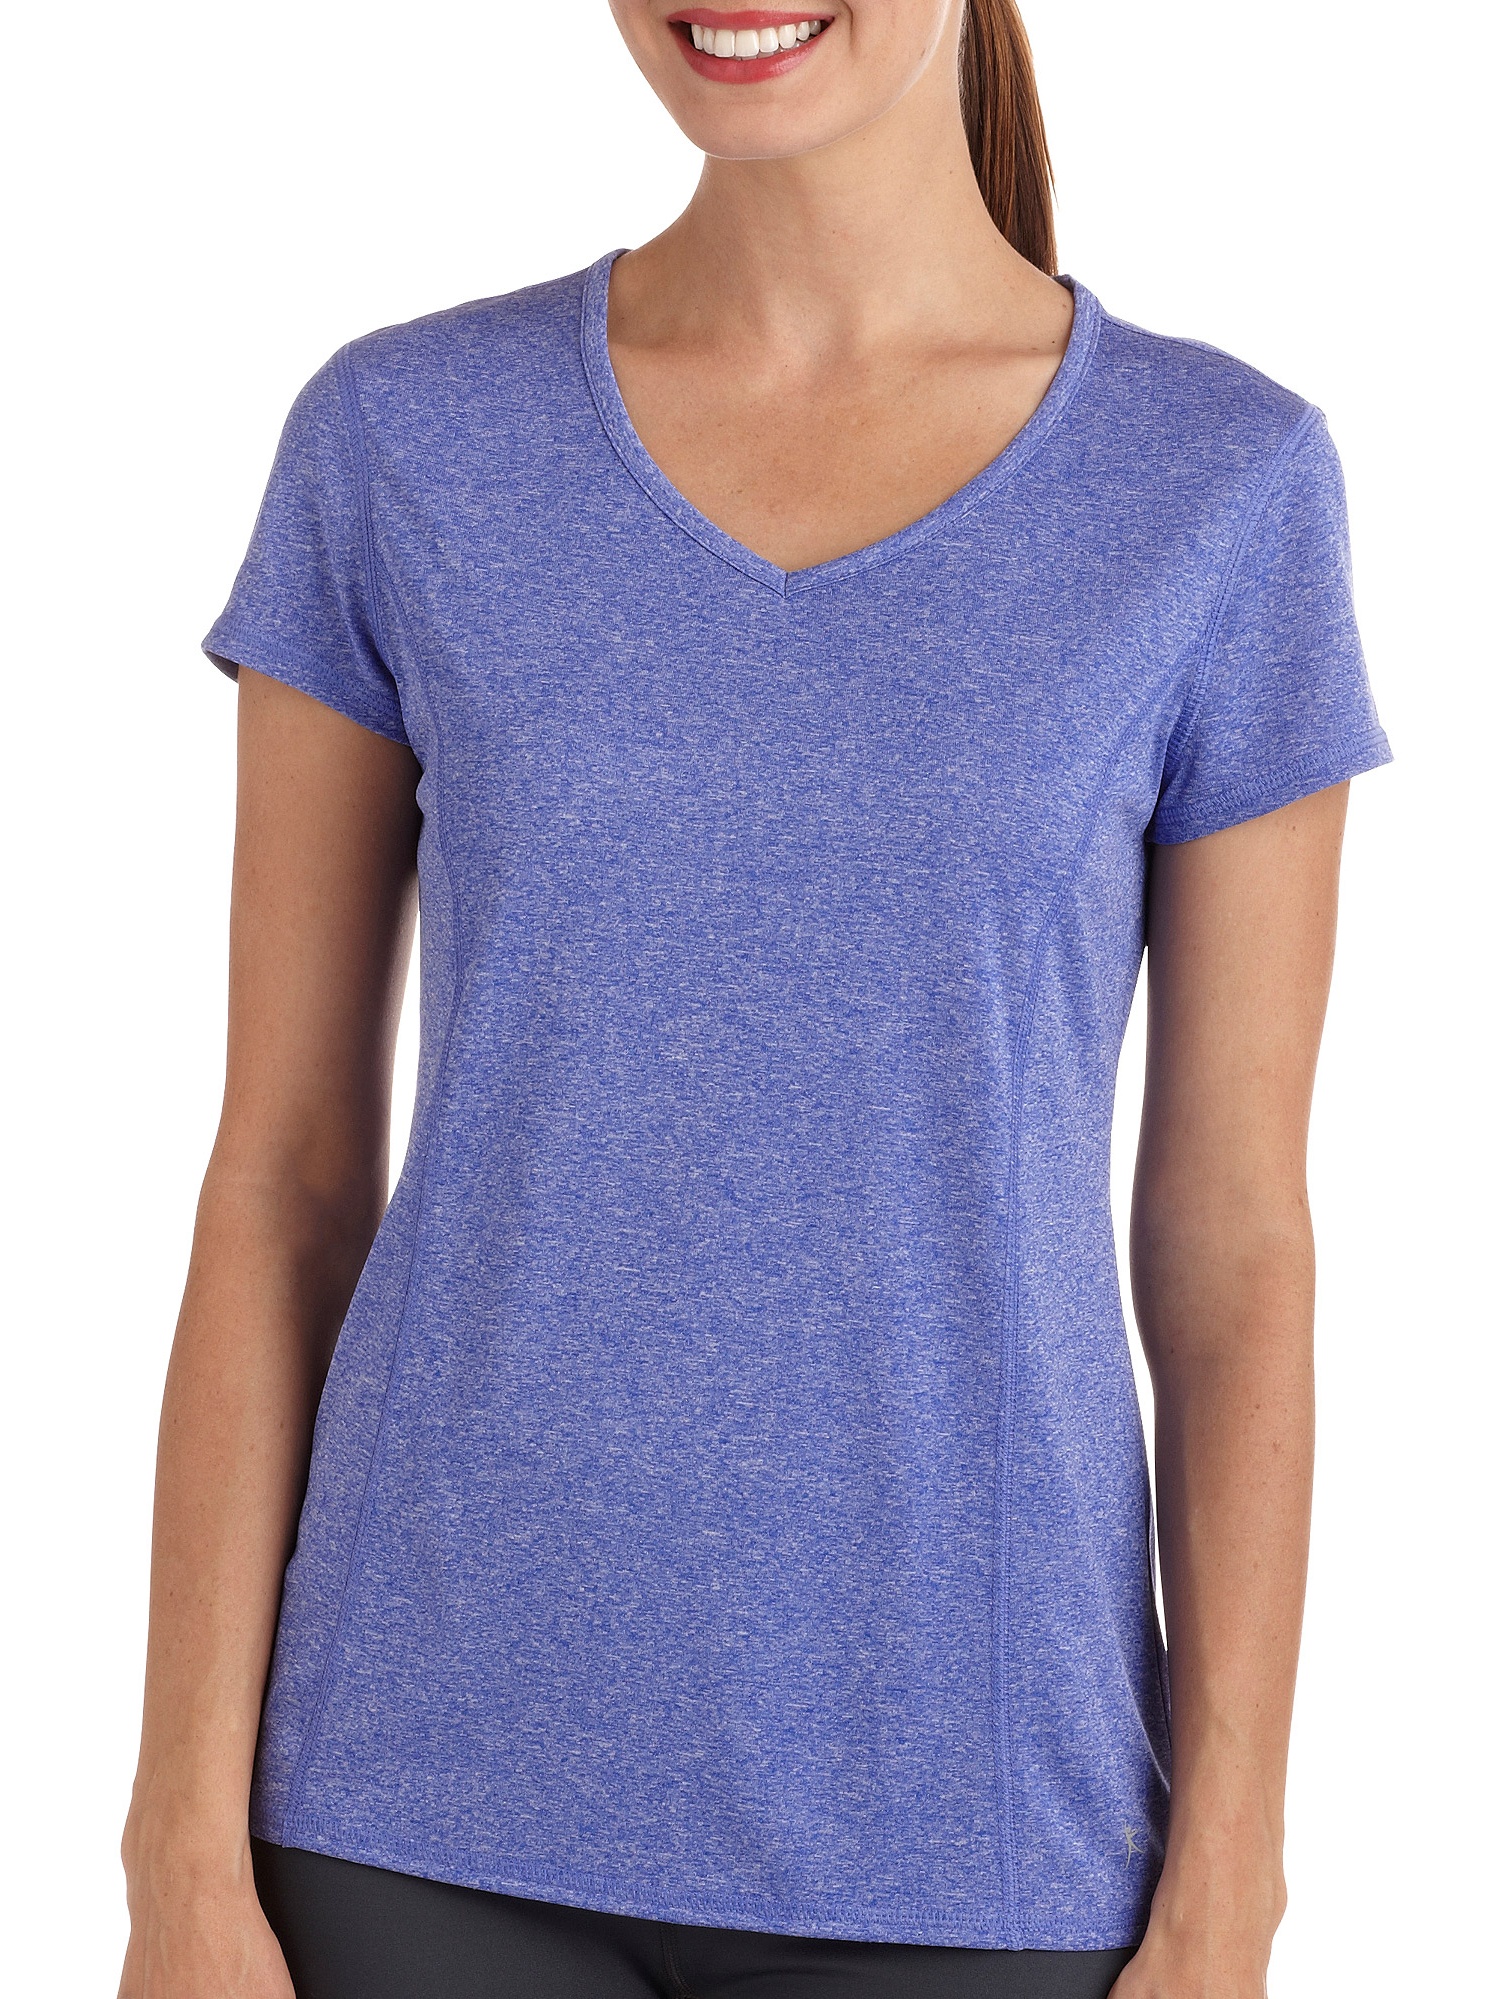 Danskin Now Women's Performance Tee With Flattering Seaming and Wicking 2-Pack - image 1 of 4